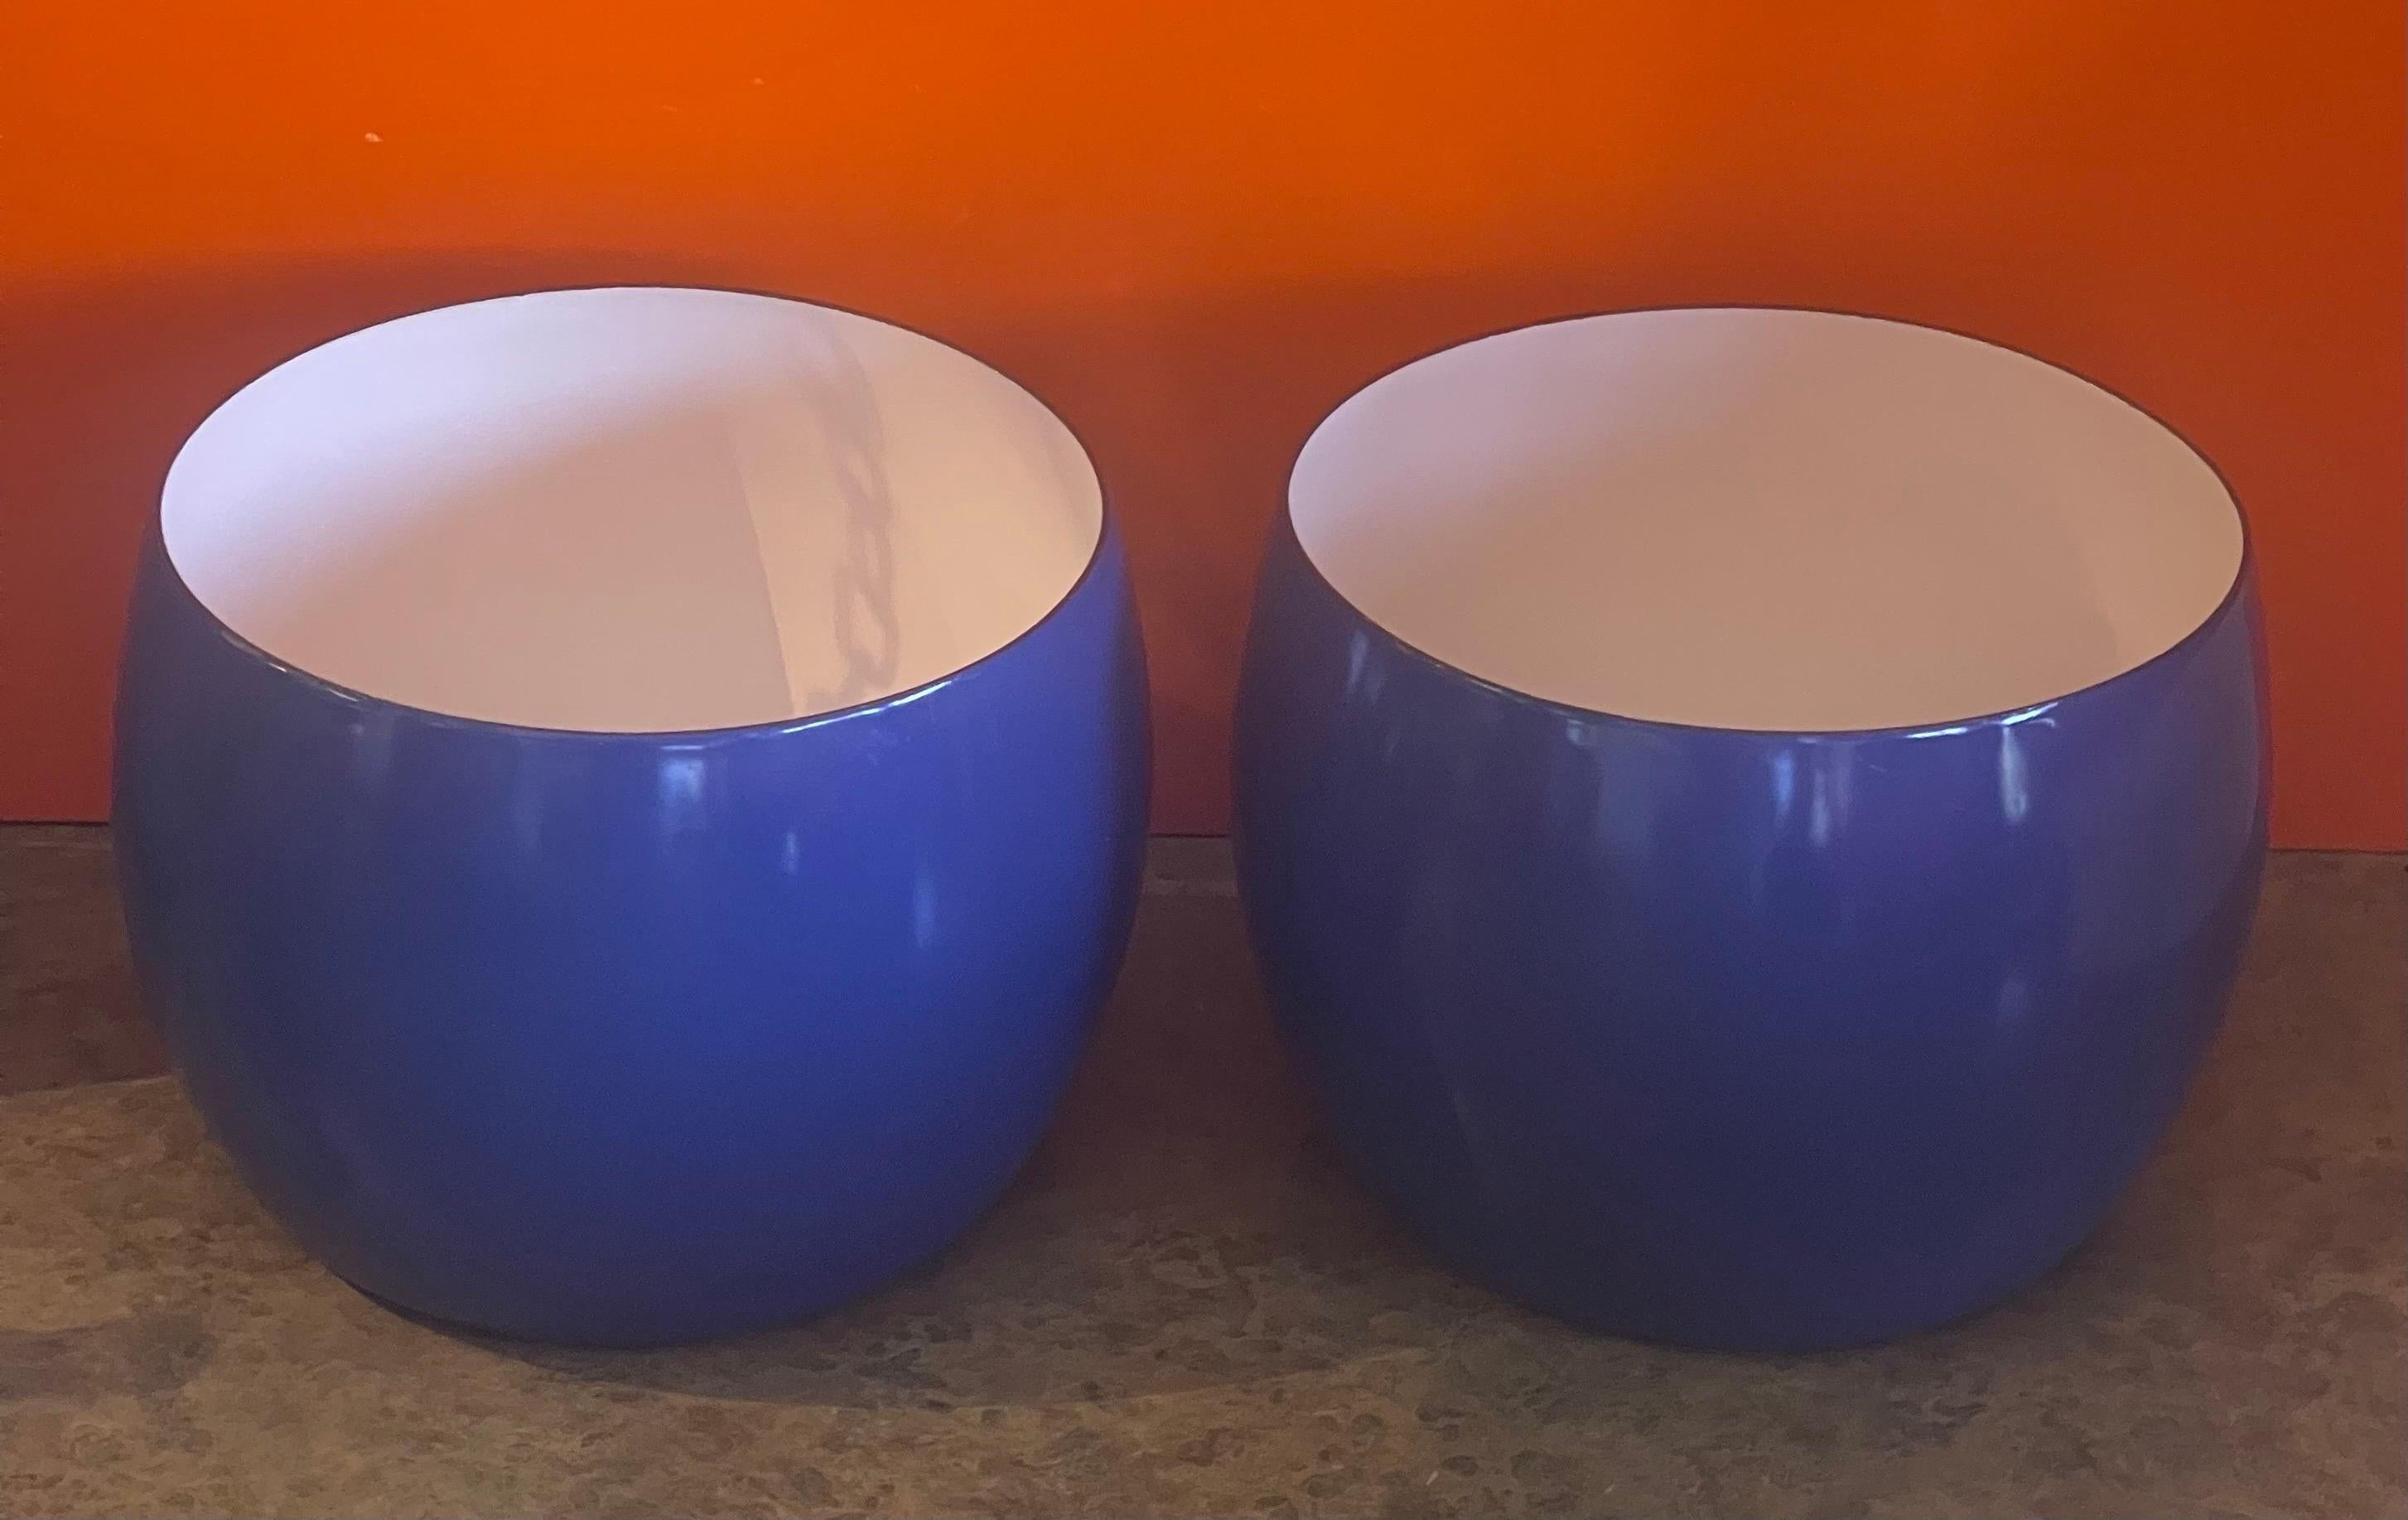 French Pair of Danish Modern Blue & White Enamel Bowl by Jens Quistgaard for Dansk For Sale